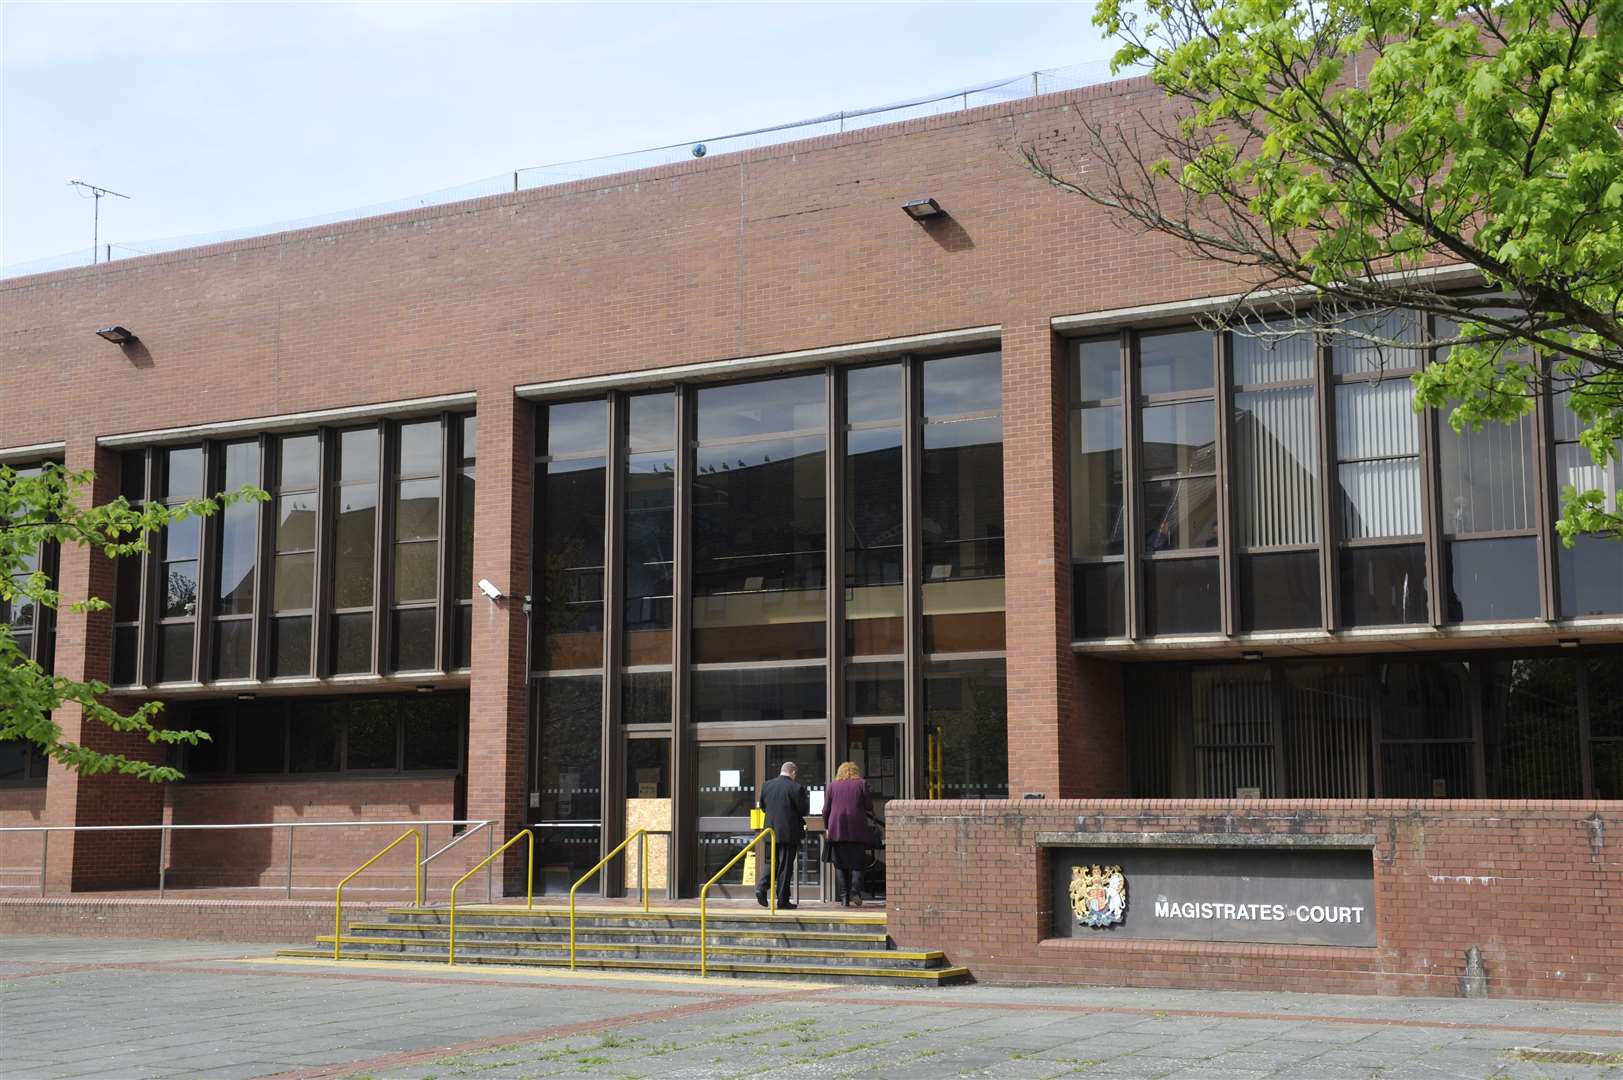 A man has appeared at Folkestone Magistrates' Court accused of drugs offences